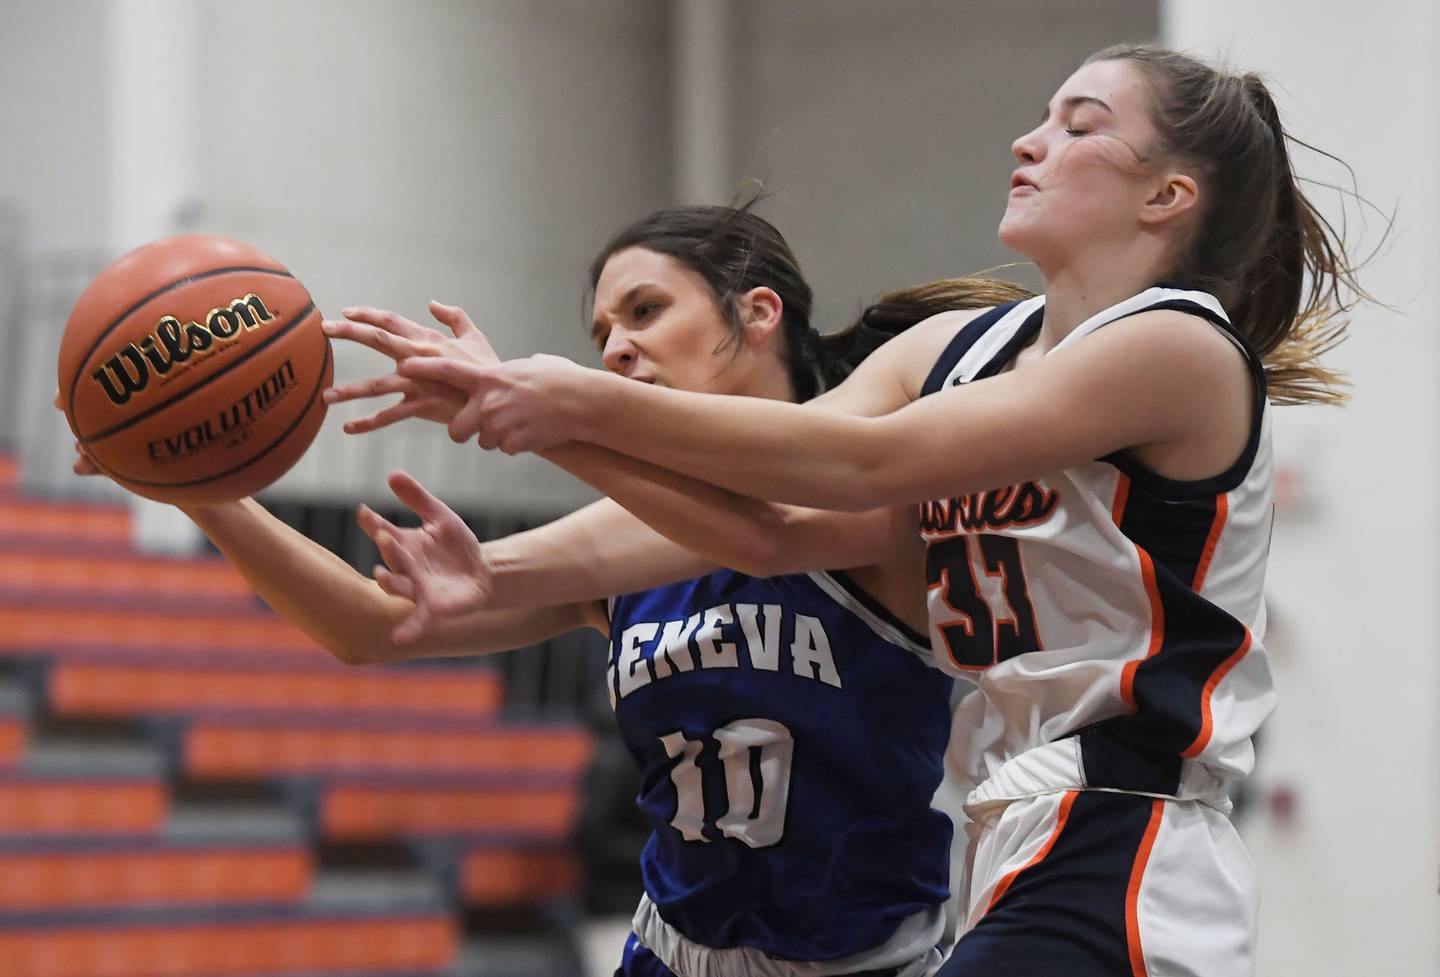 Geneva’s Peri Sweeney and Naperville North’s Ema Gilvydis battle for the ball in a girls basketball game in Naperville on Tuesday, Nov. 28, 2023.